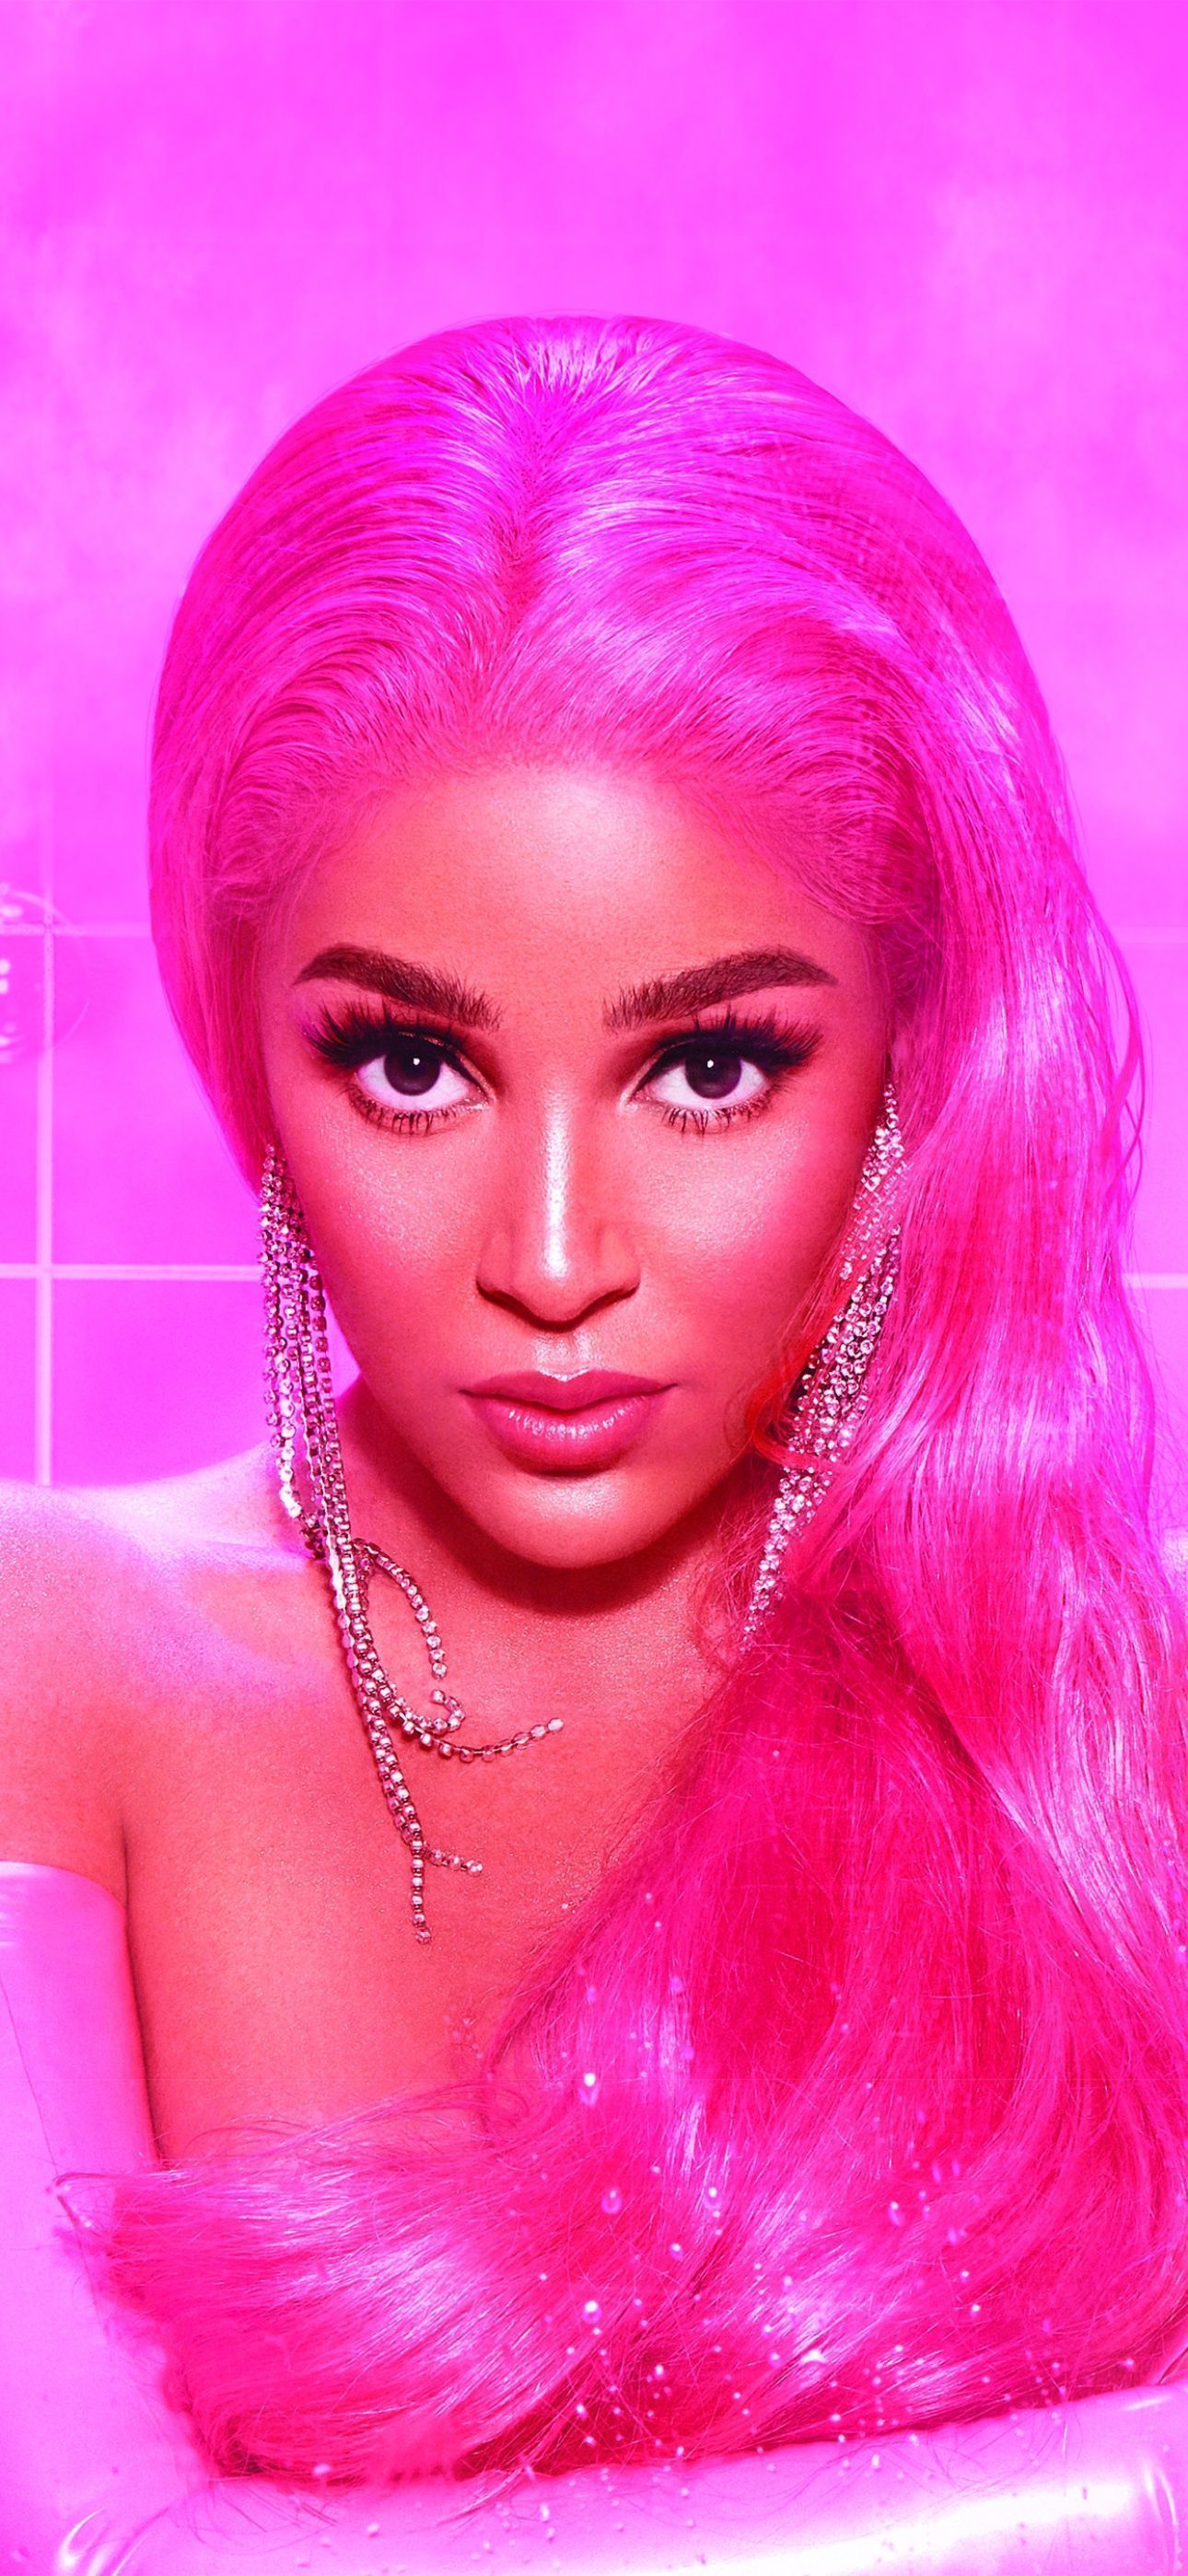 A woman with pink hair and big earrings - Doja Cat, pink